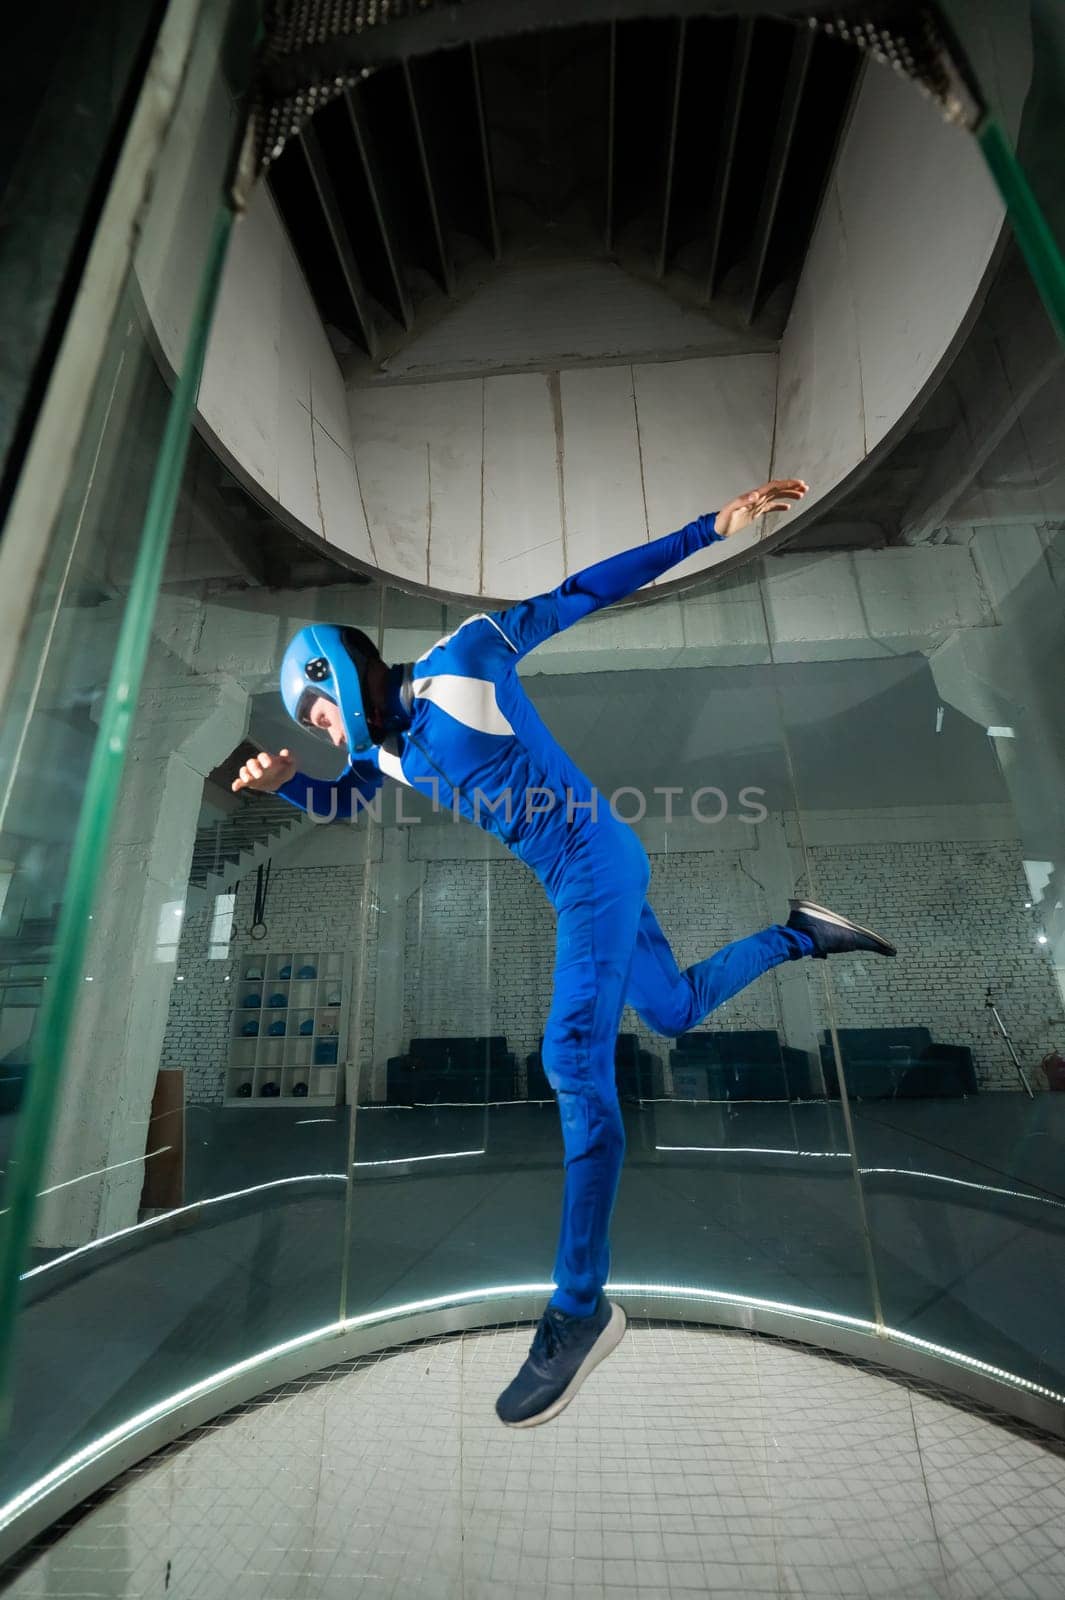 A man in overalls and a protective helmet enjoys flying in a wind tunnel. Free fall simulator.